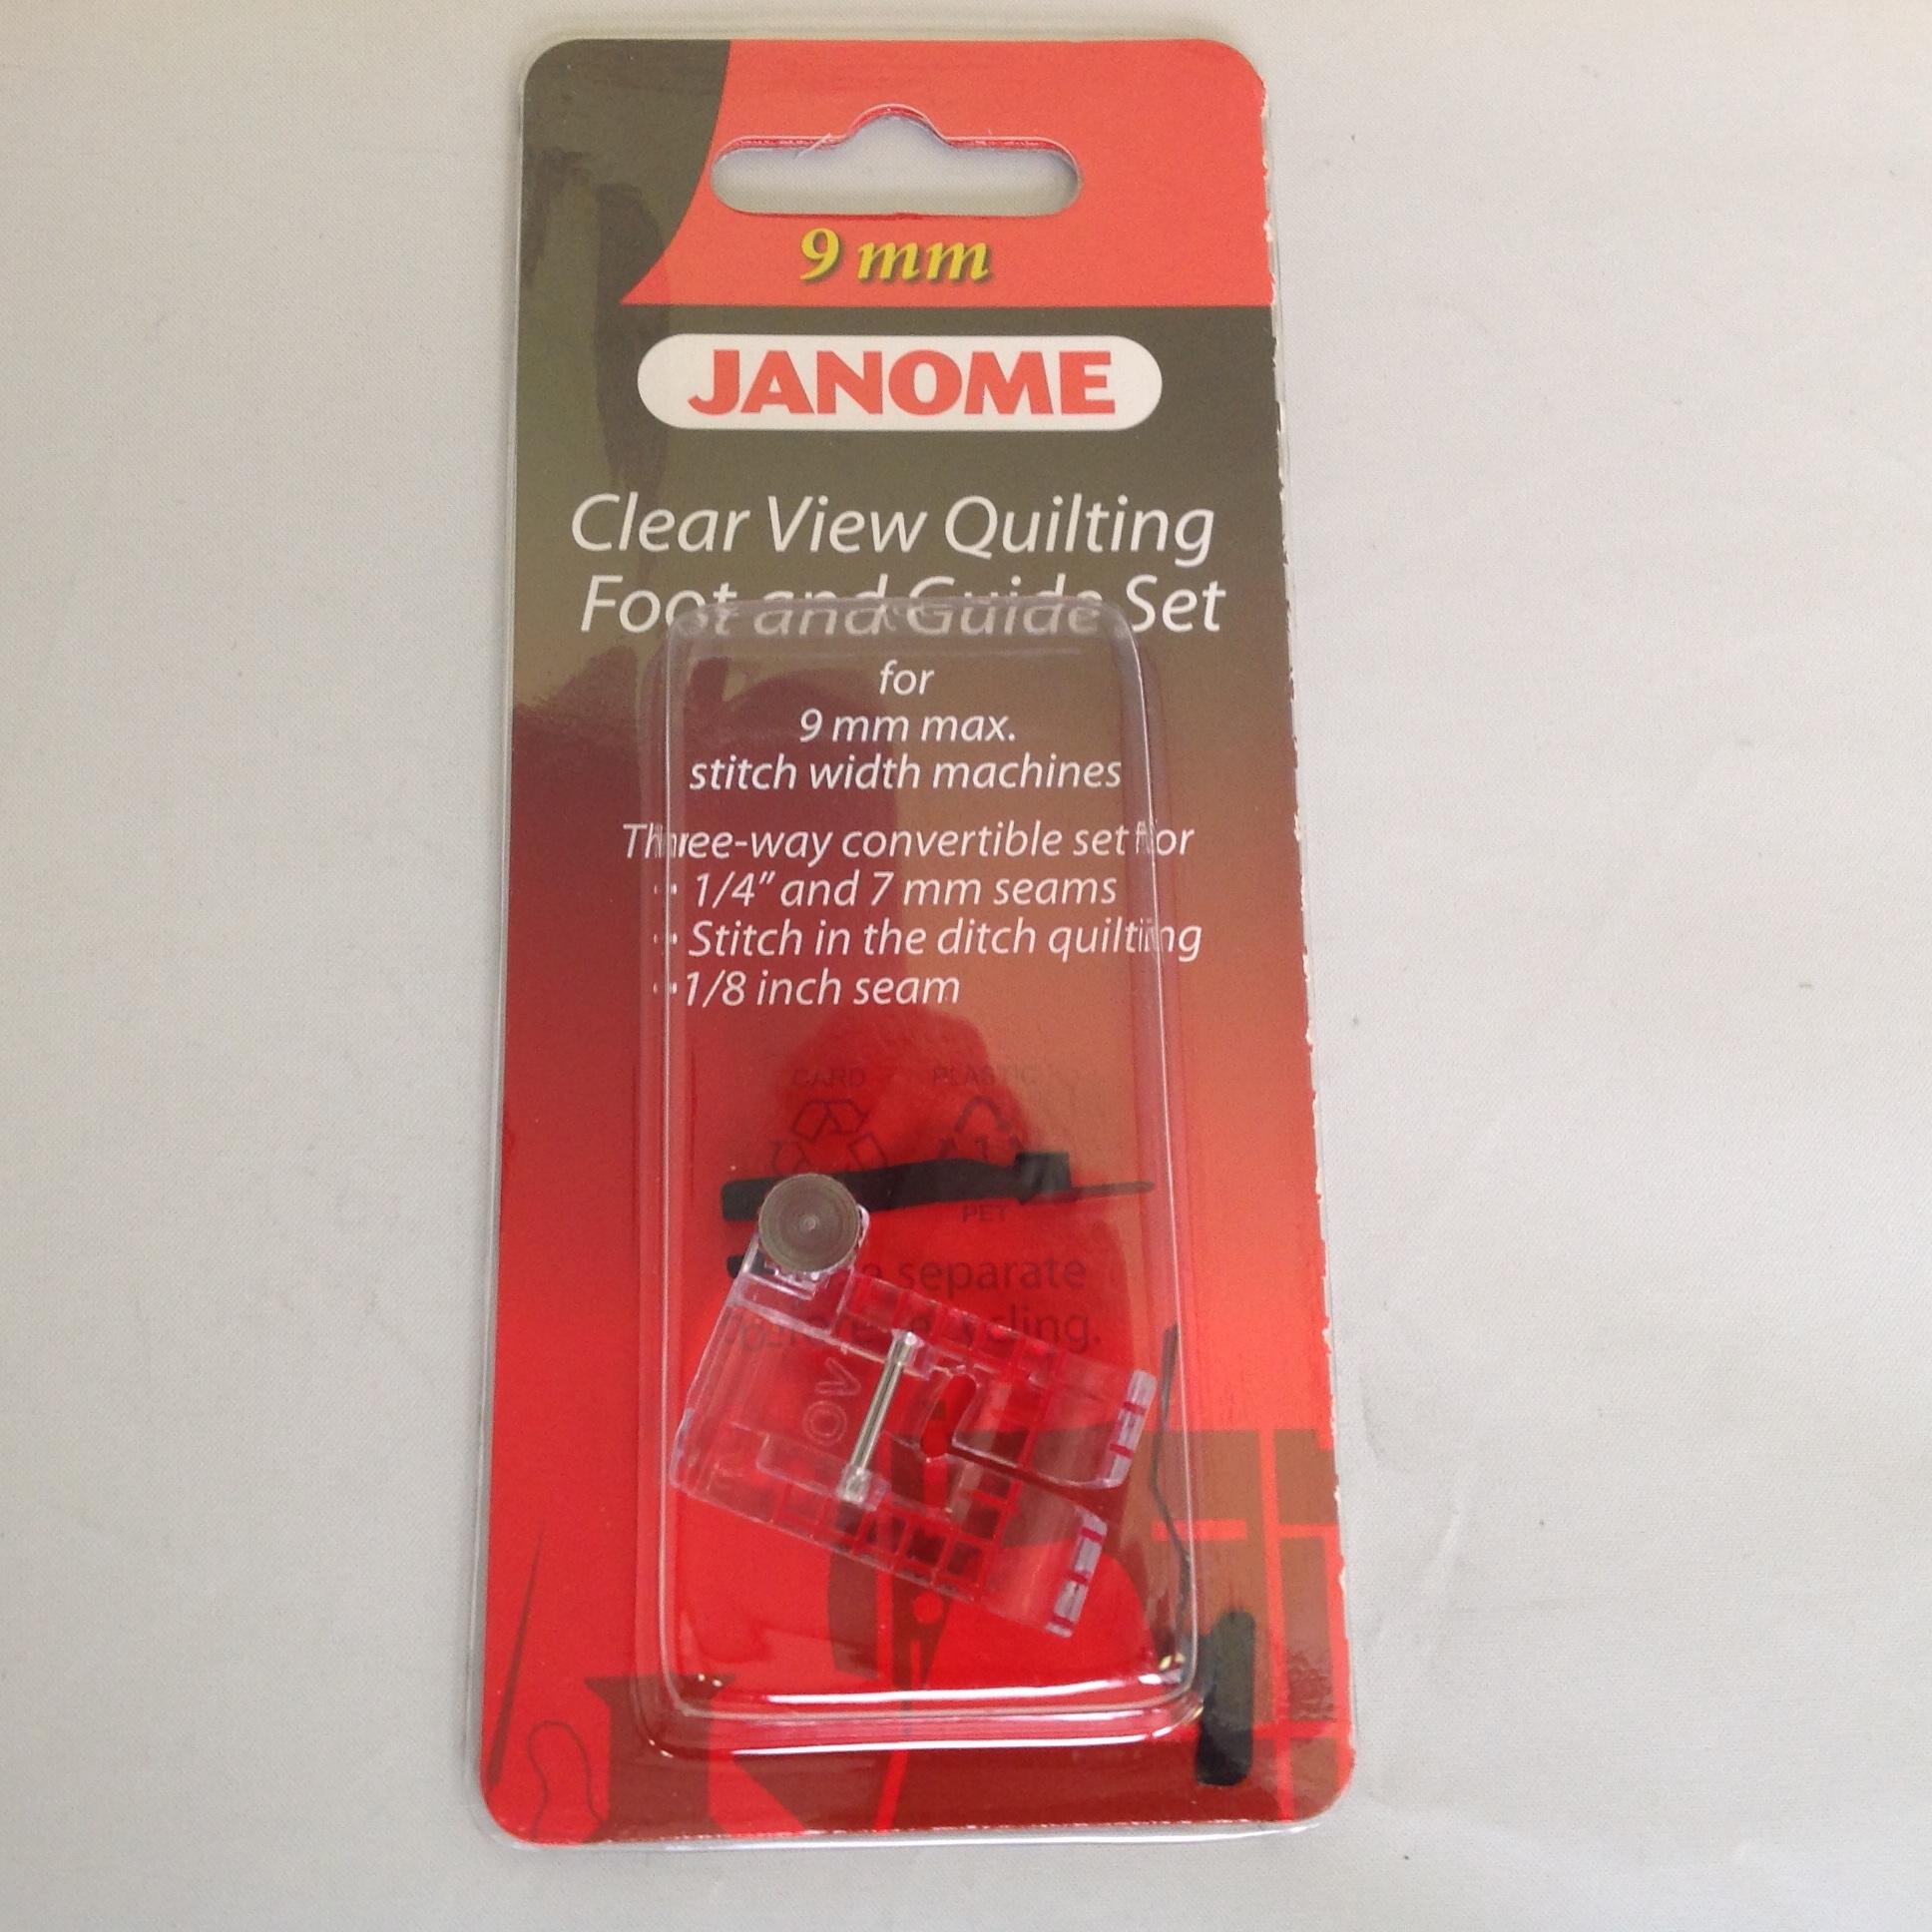 C 200449001 JANOME CLEAR VIEW Ditch Quilting 1/4 1/8 Pieds Set Guides _ CAT B